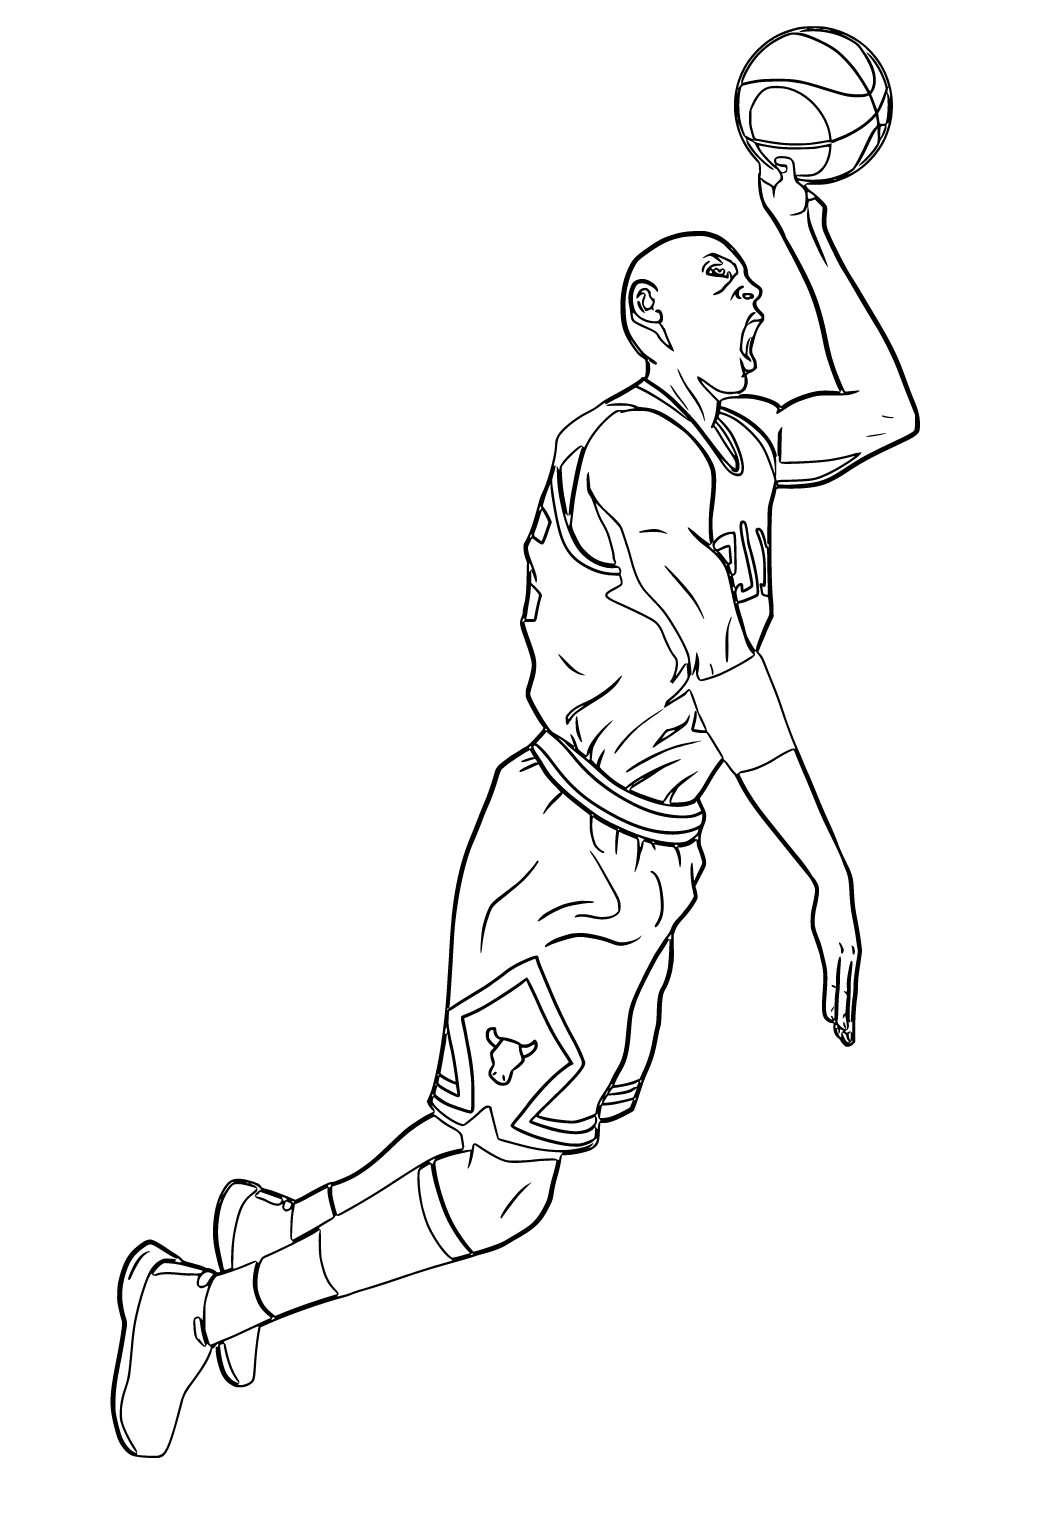 Free printable michael jordan throw coloring page for adults and kids